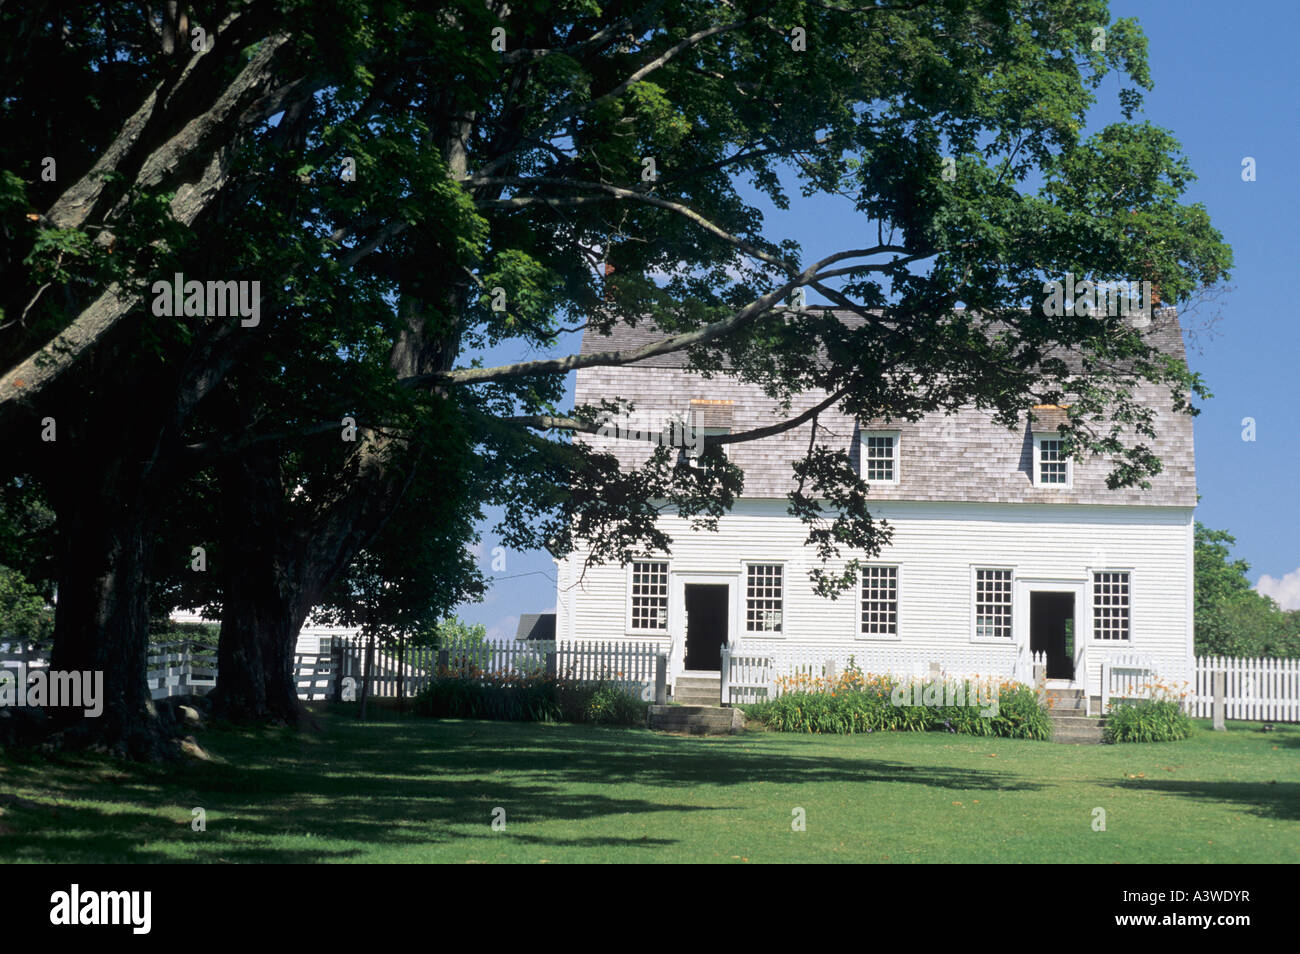 MEETING HOUSE (CIRCA 1792) IN THE CANTERBURY SHAKER VILLAGE, CENTRAL NEW HAMPSHIRE. SUMMER. JULY. Stock Photo